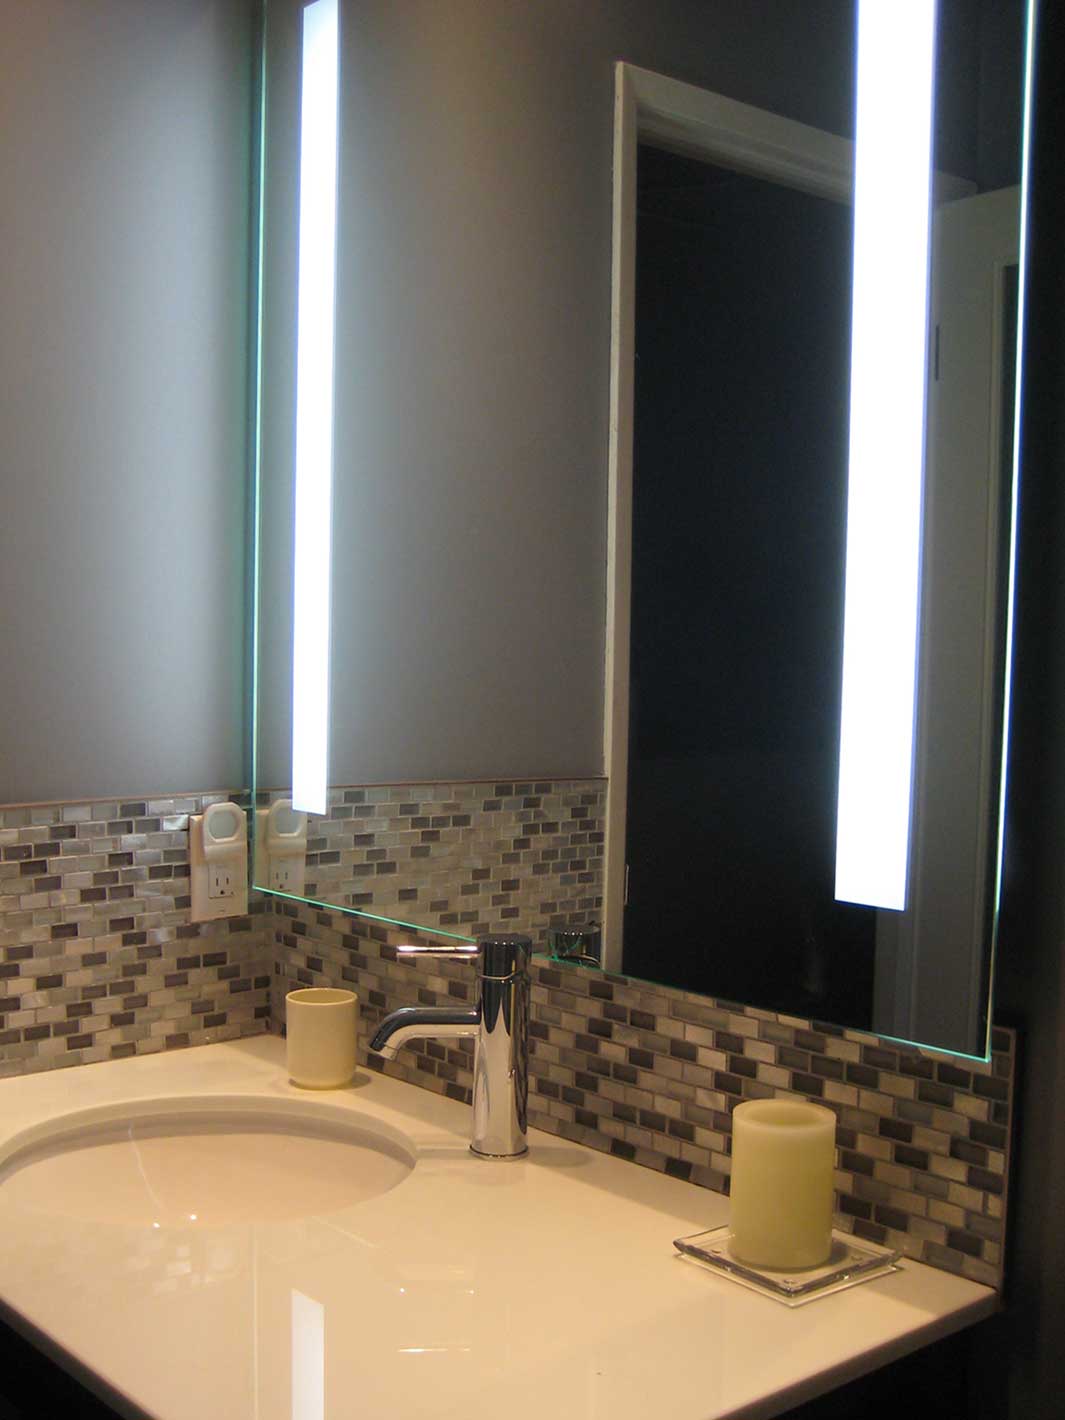 LED mirror installed over vanity